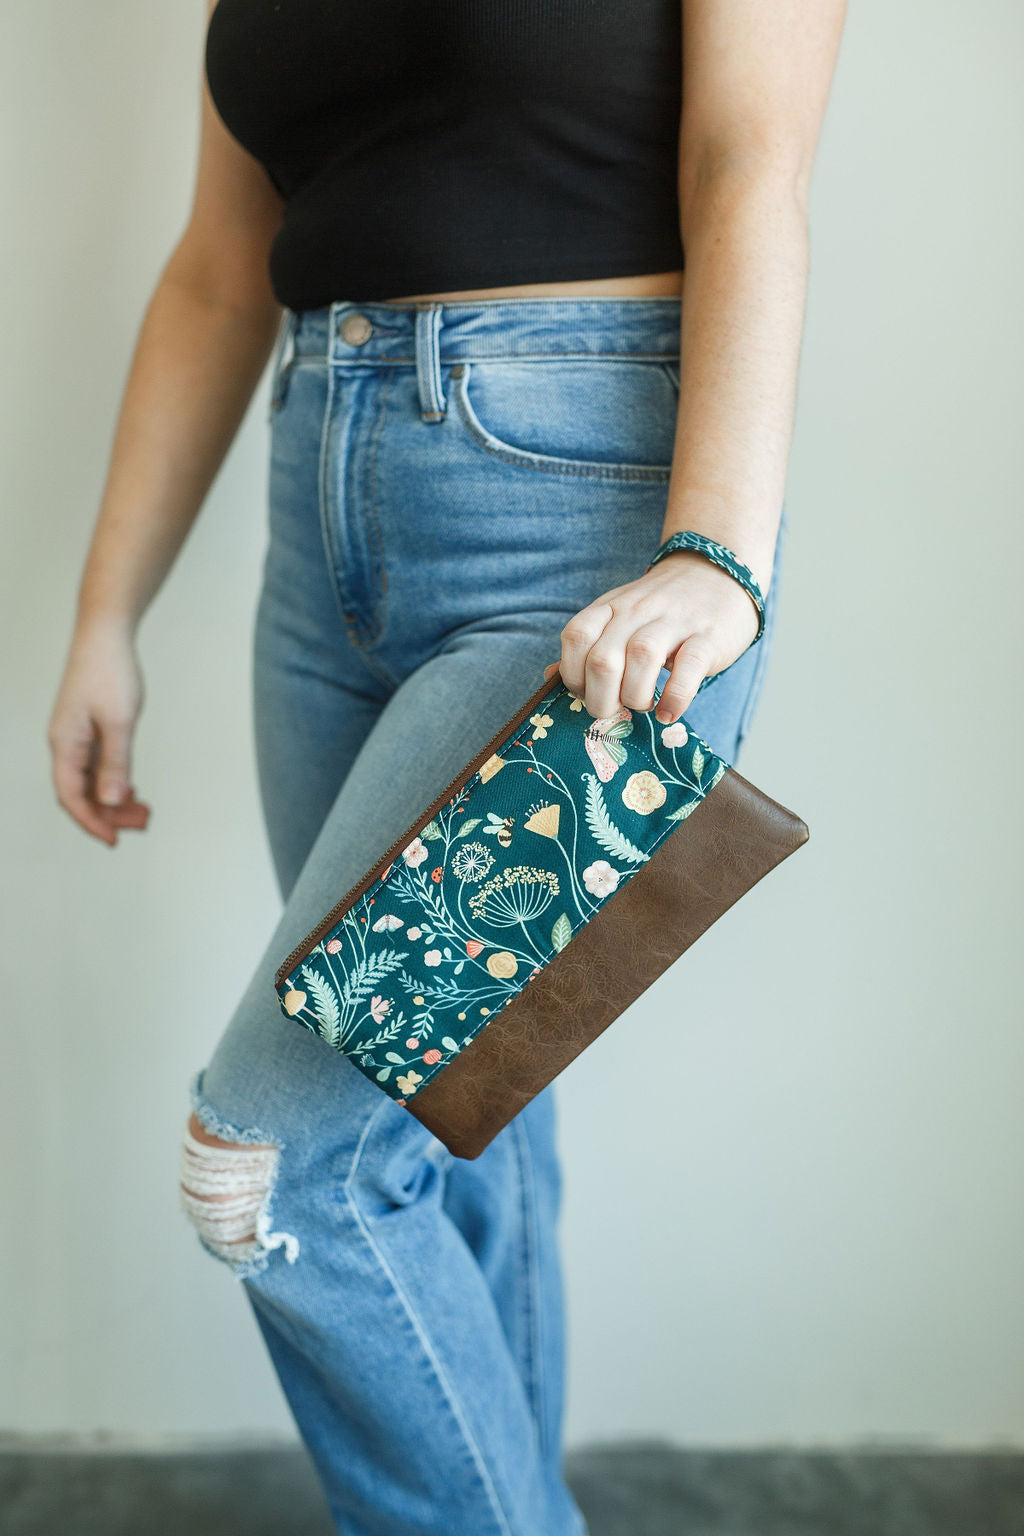 Green forest/nature wristlet